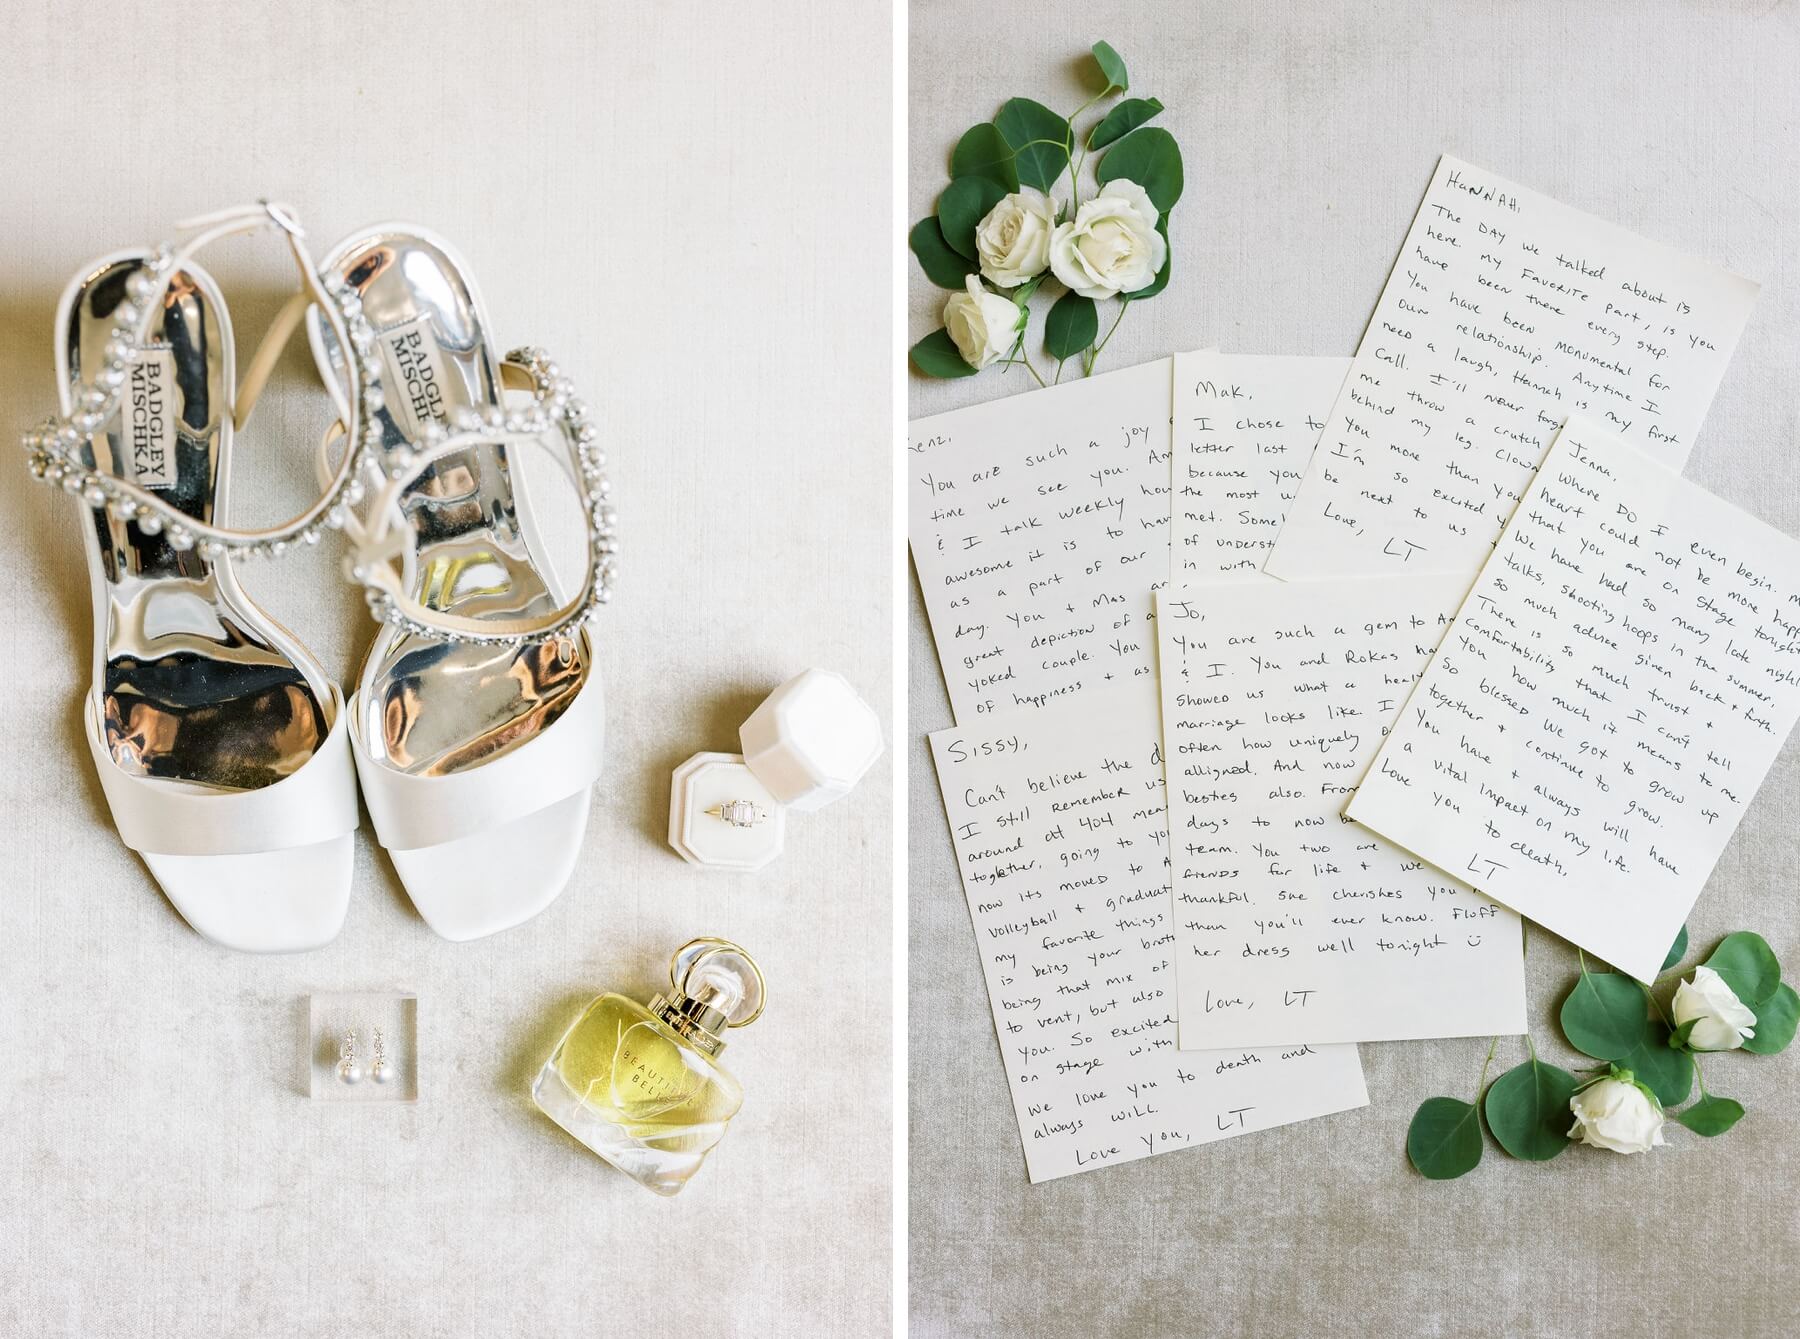 White Badly Mischka bridal shoes with wedding ring, perfume, and handwritten vows